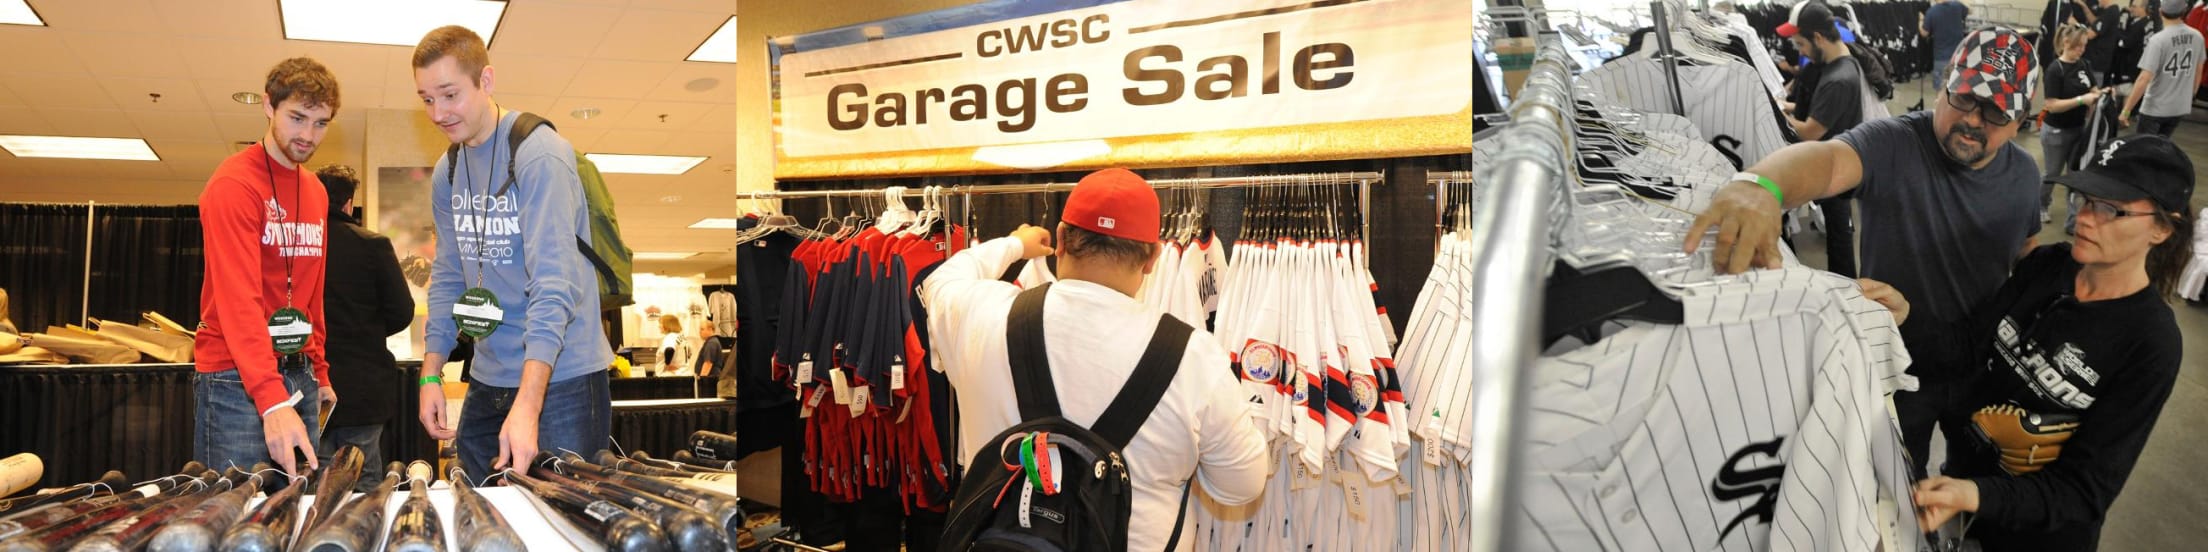 Chicago White Sox Charities Hosts Garage Sale For Fans 